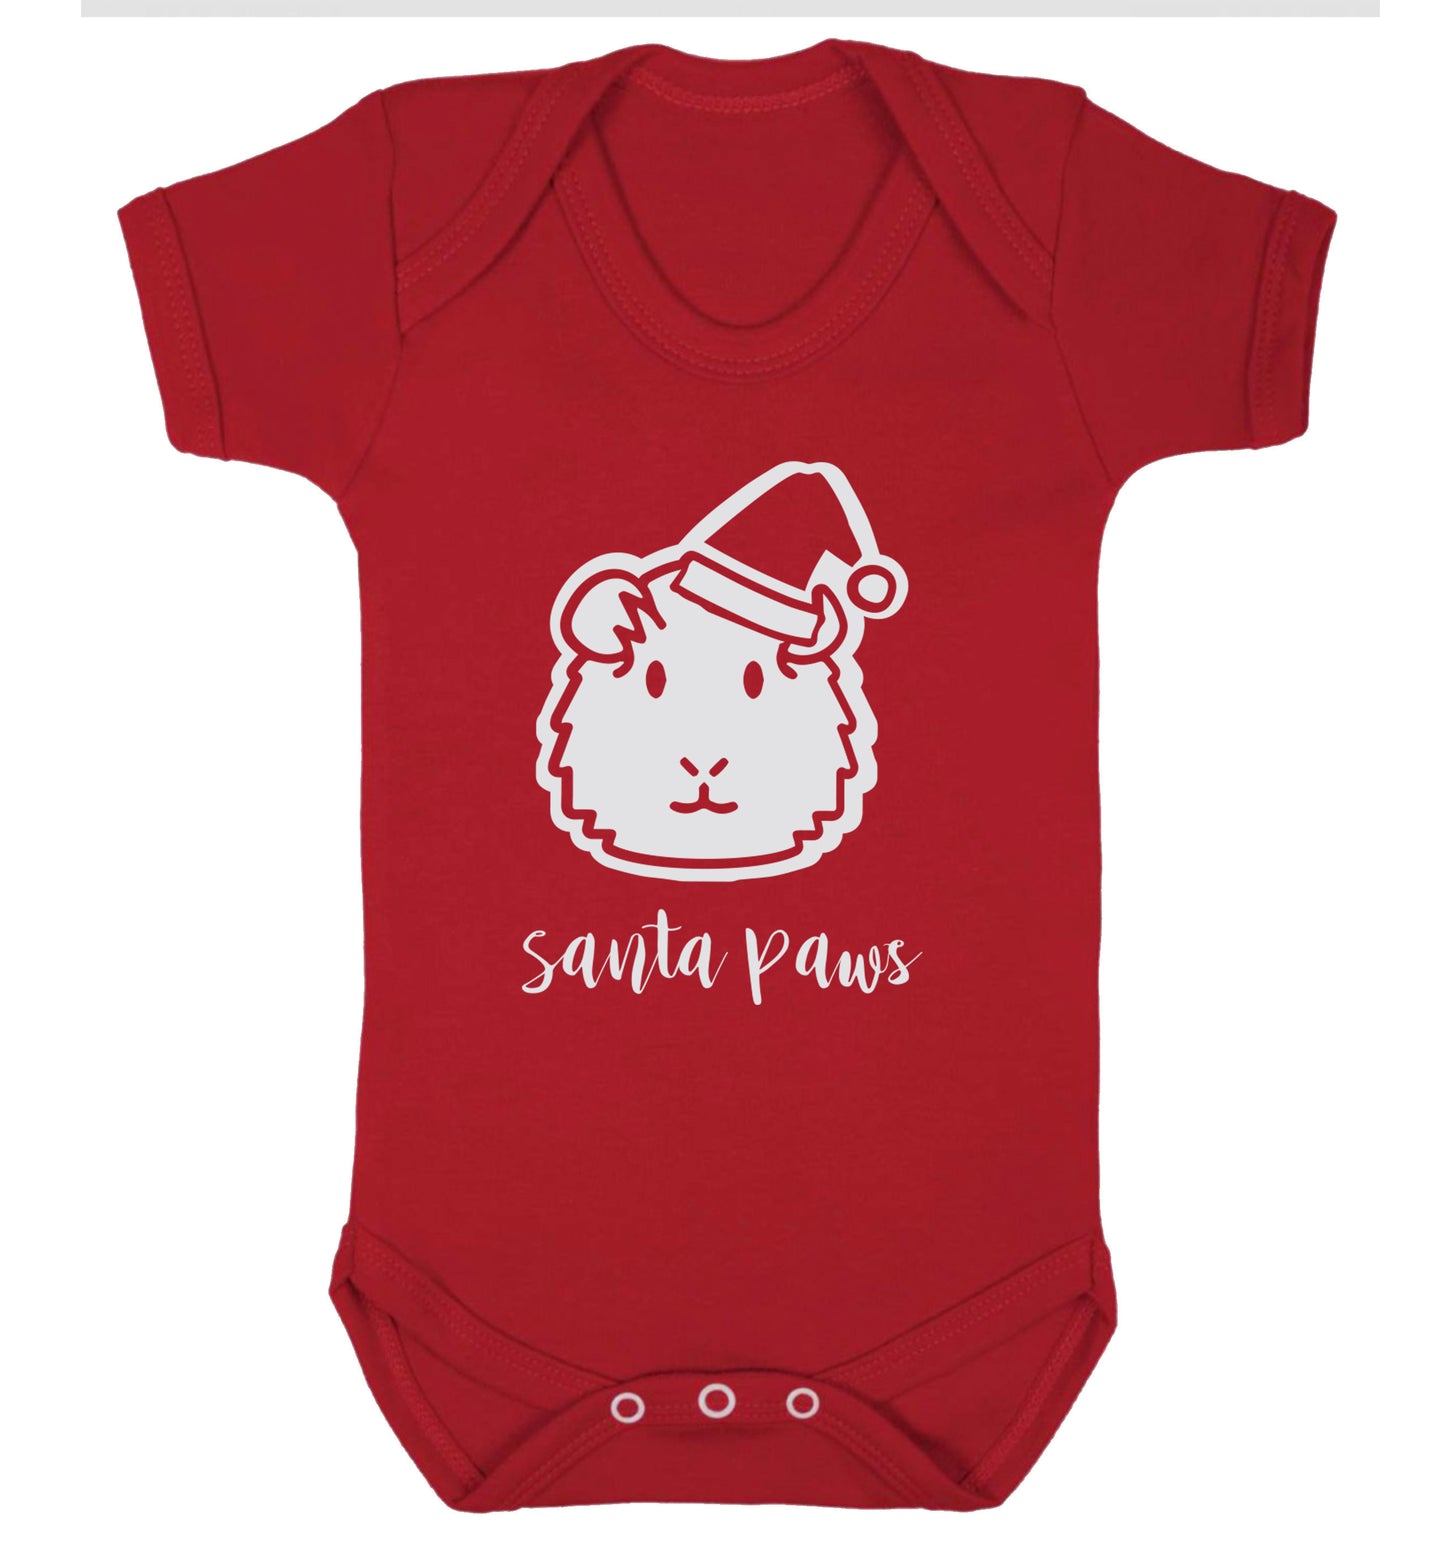 Guinea pig Santa Paws Baby Vest red 18-24 months